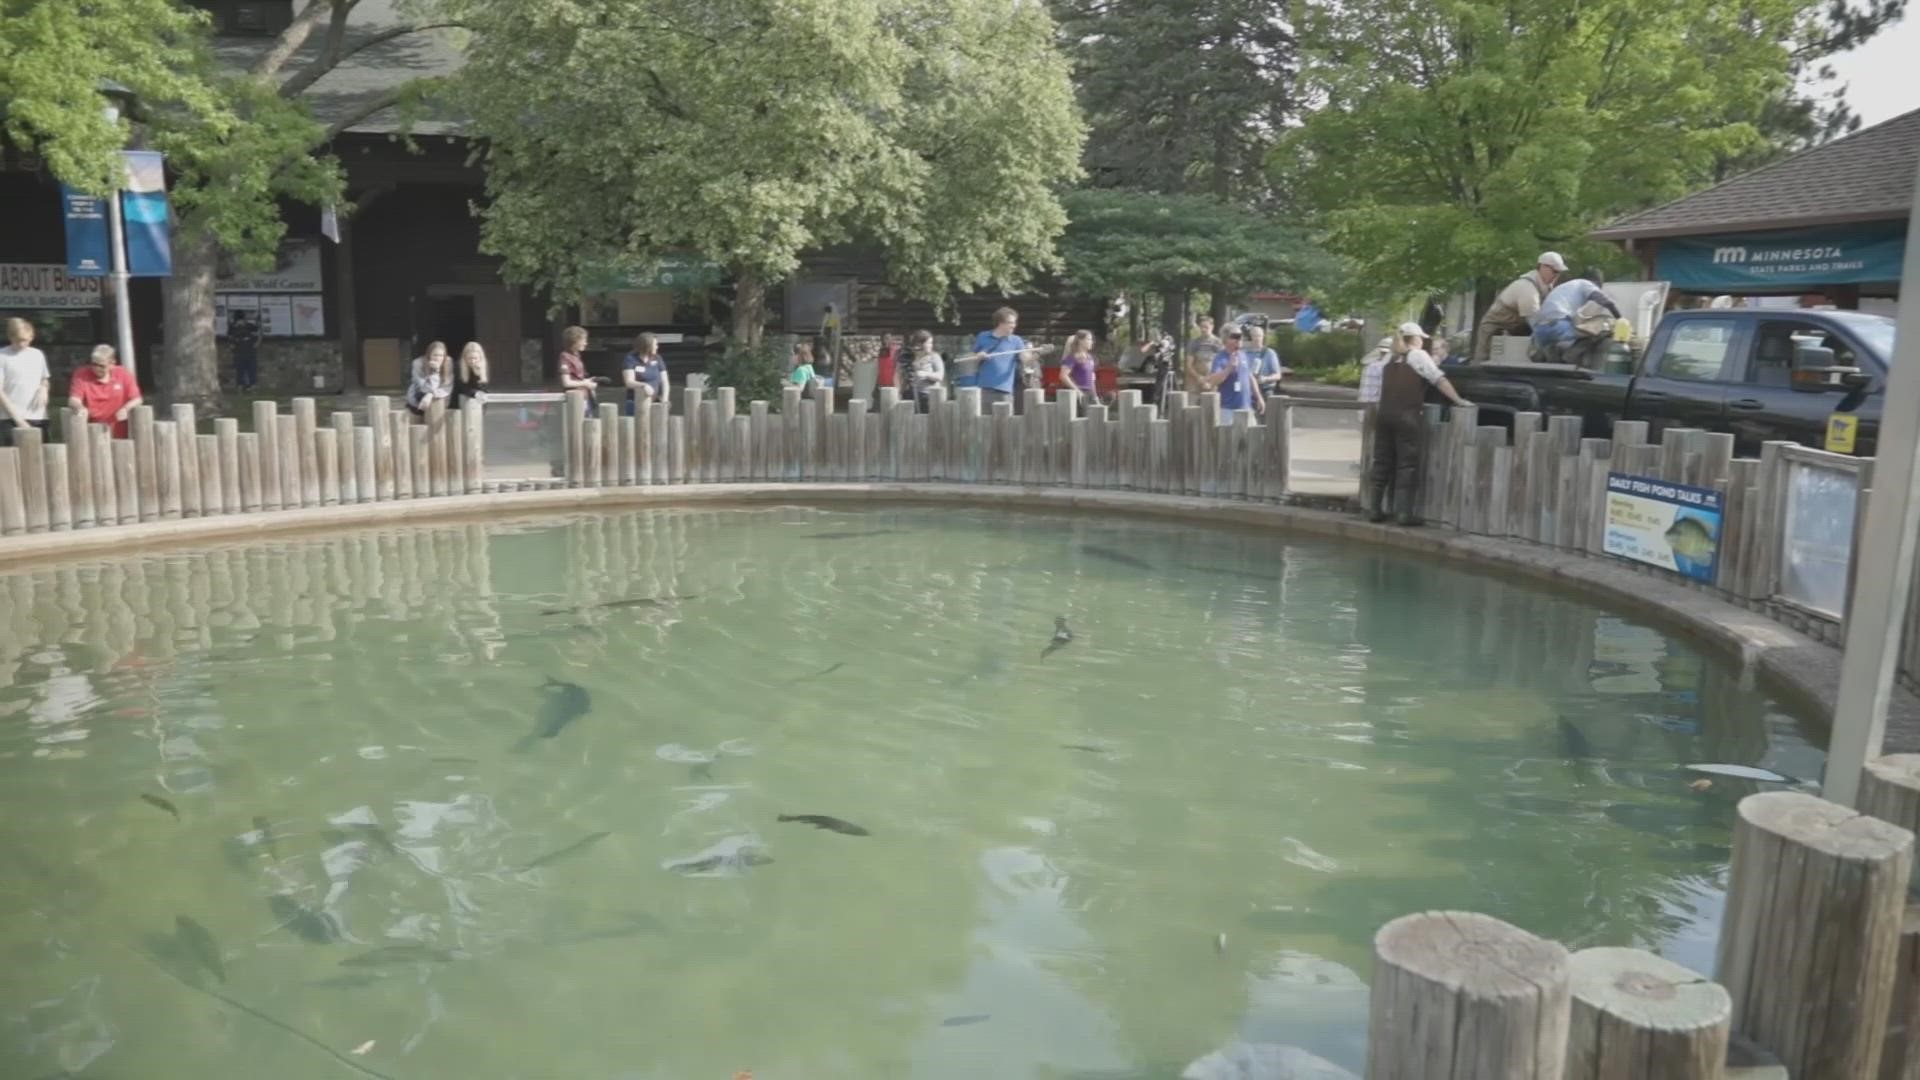 The DNR State Fair fish pond is an oasis in the middle of chaos, but getting it up and running is no easy task.